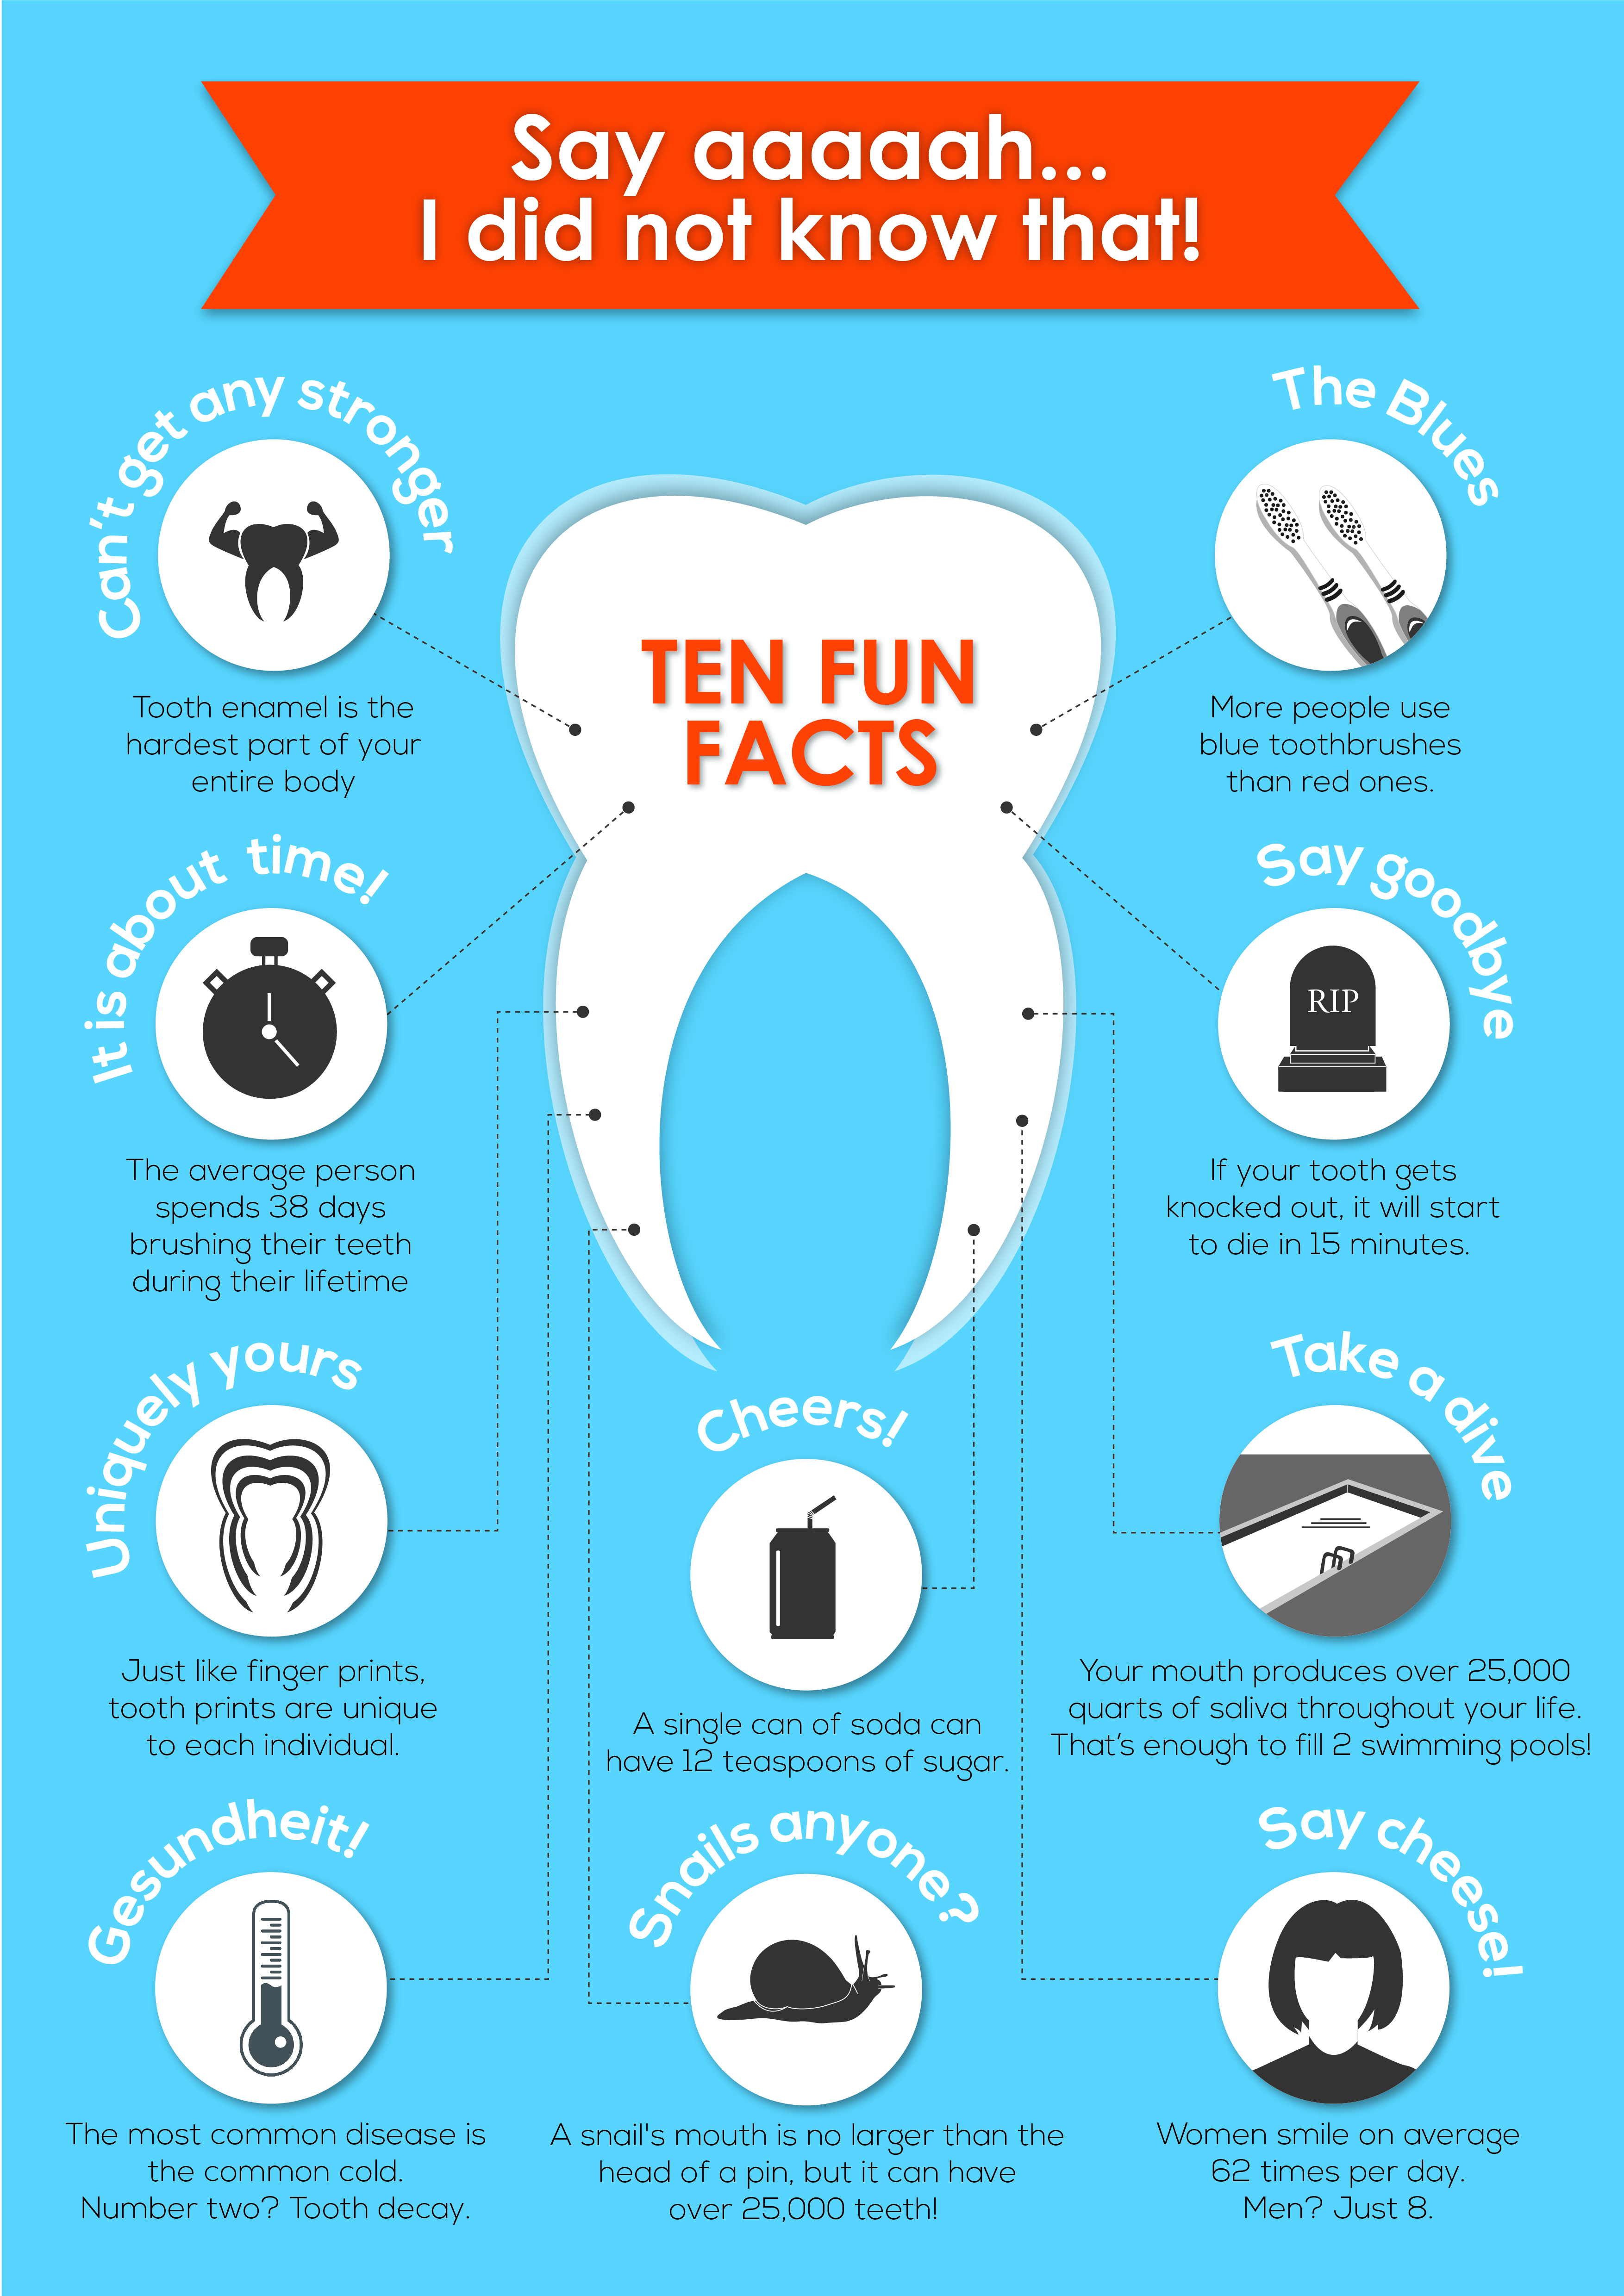 What You Don't Know About Your Teeth - Infographic